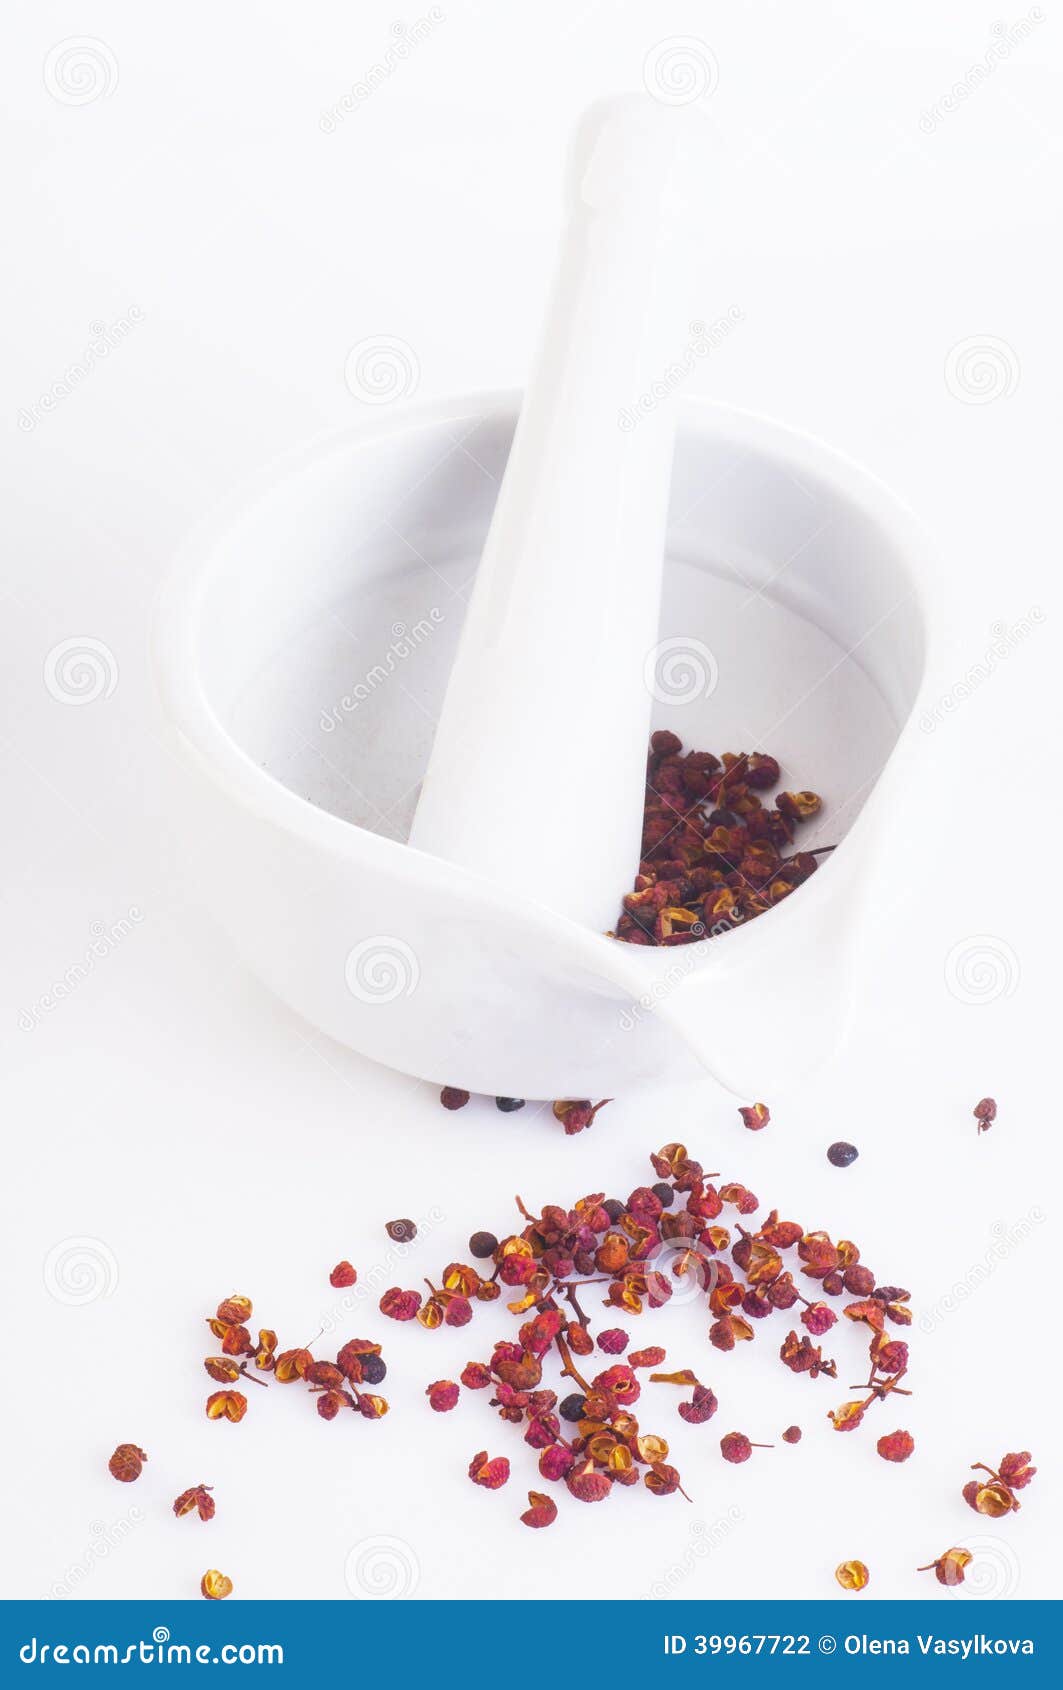 sichuan pepper in pounder